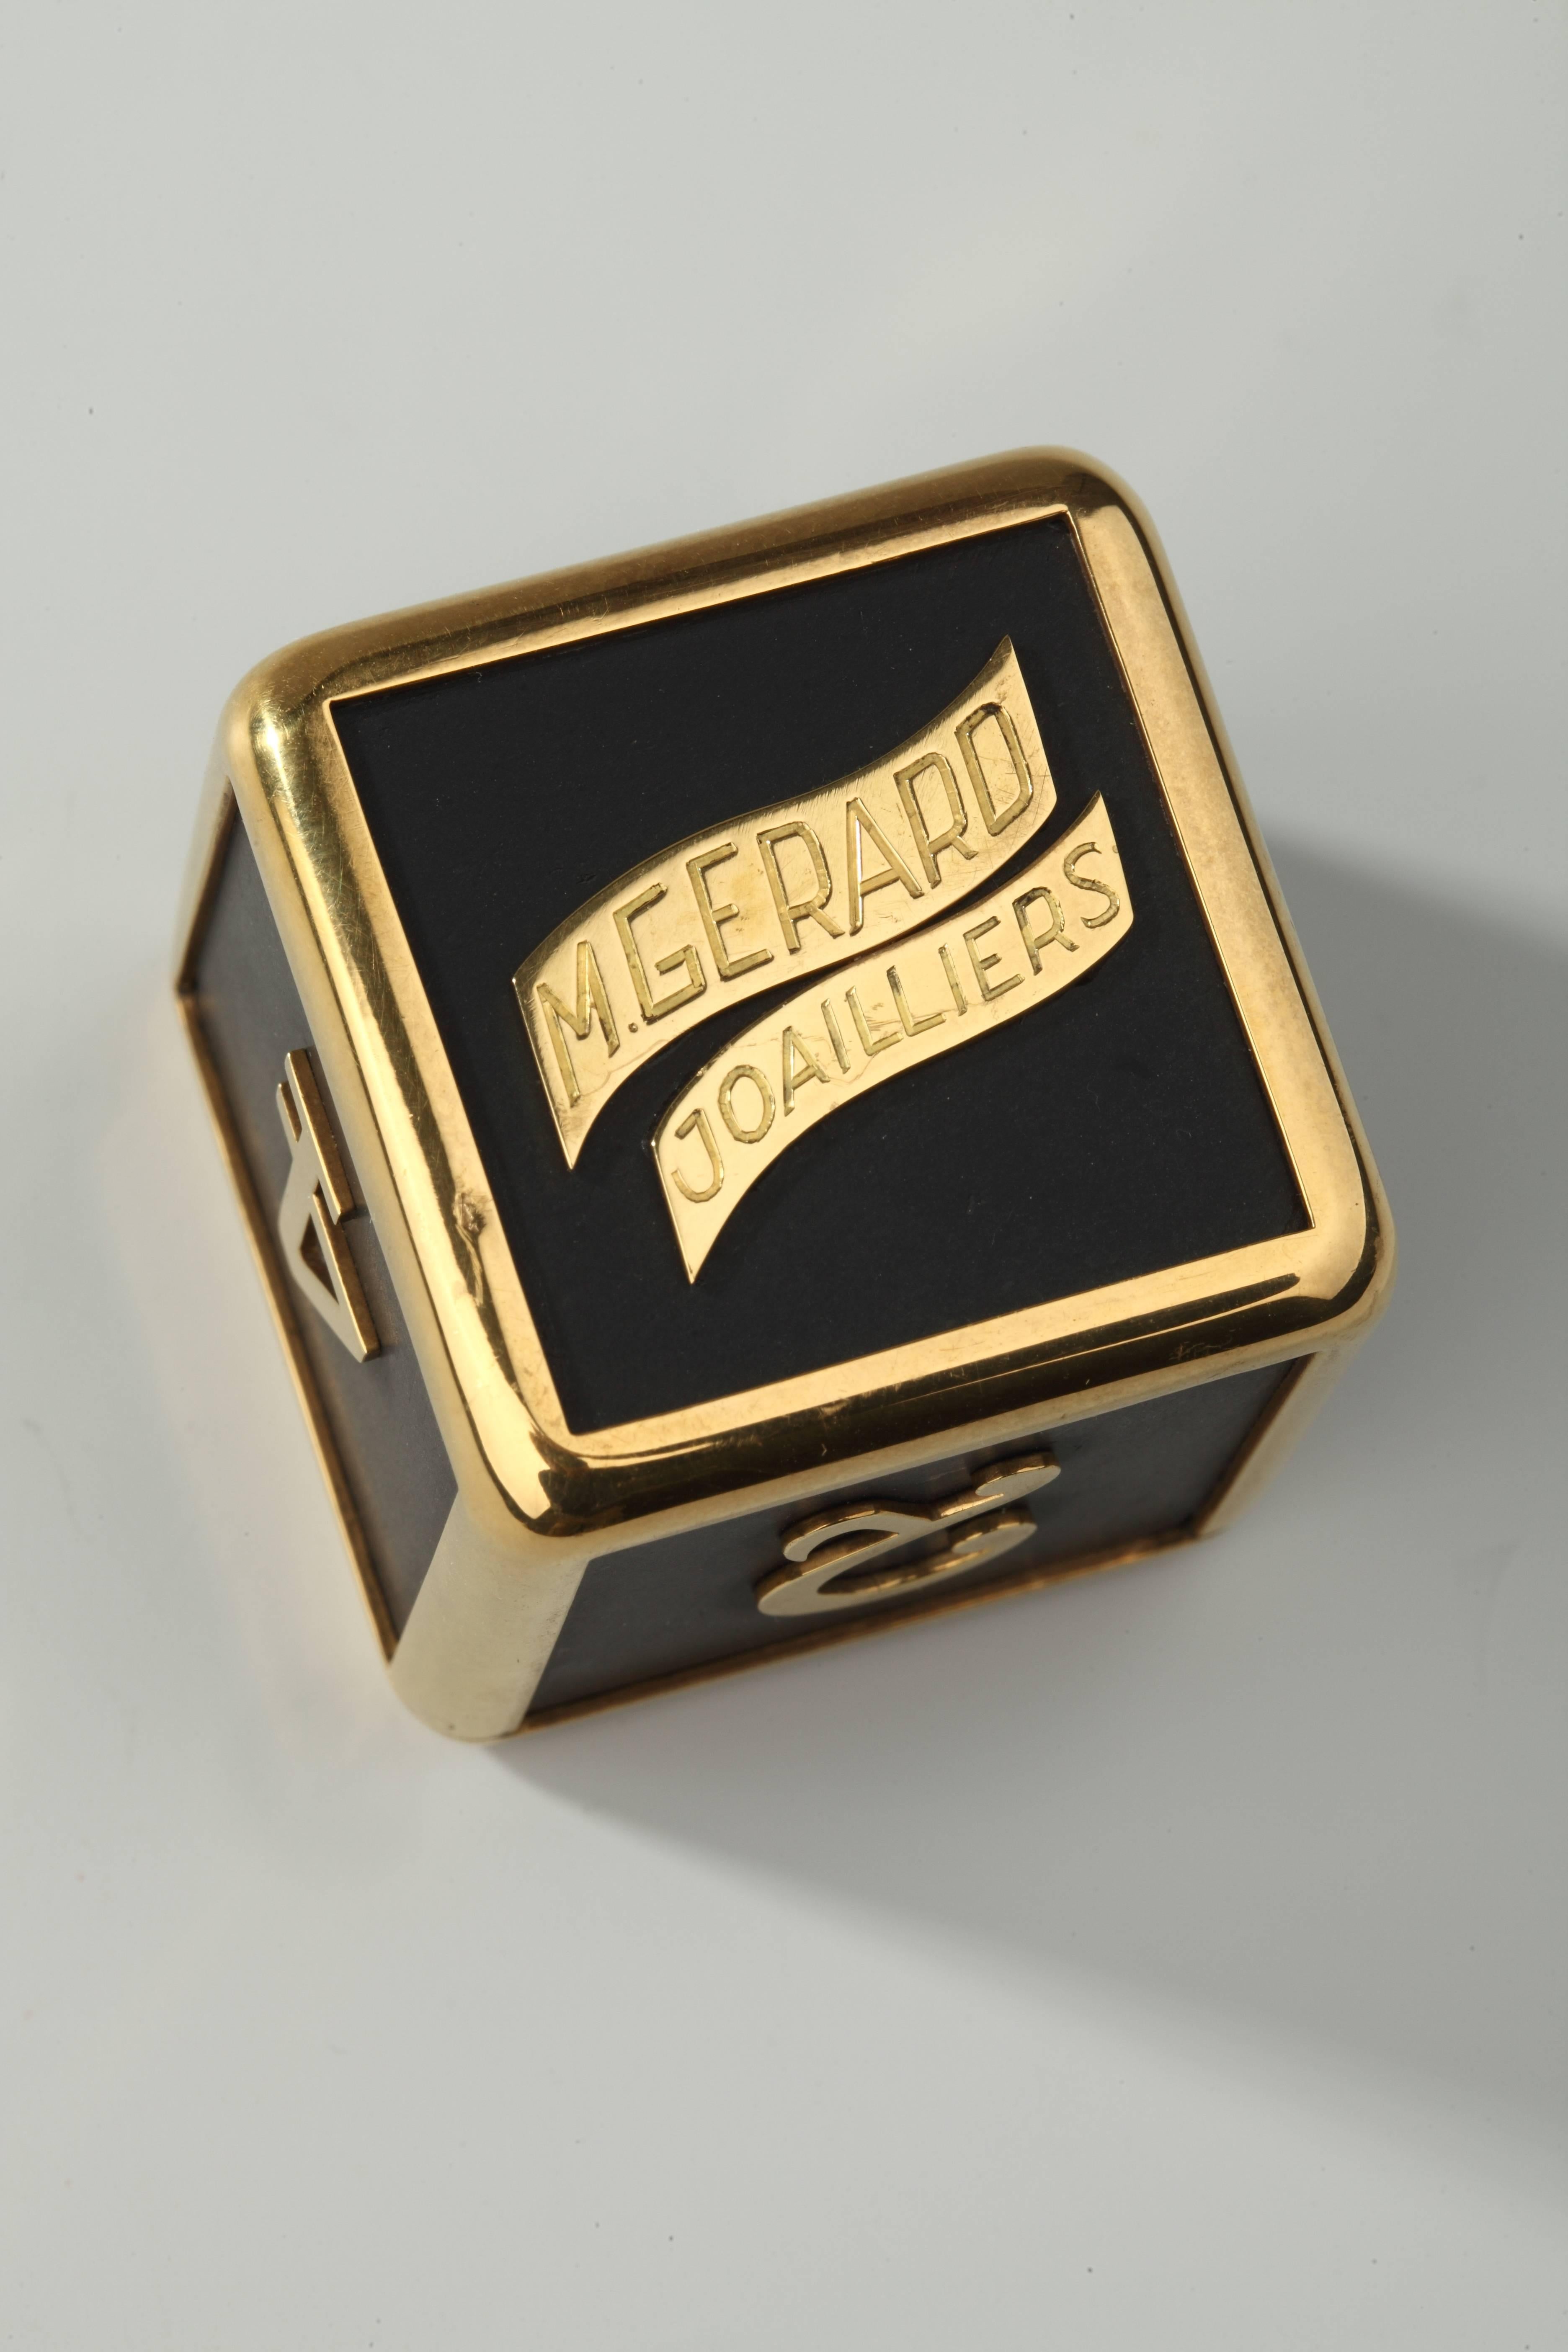 In yellow gold (18K) and slate, this is an extremely rare splitter dice for backgamon.
This dice has been made by M. Gerard for an international backgamon tournament held in Paris. 